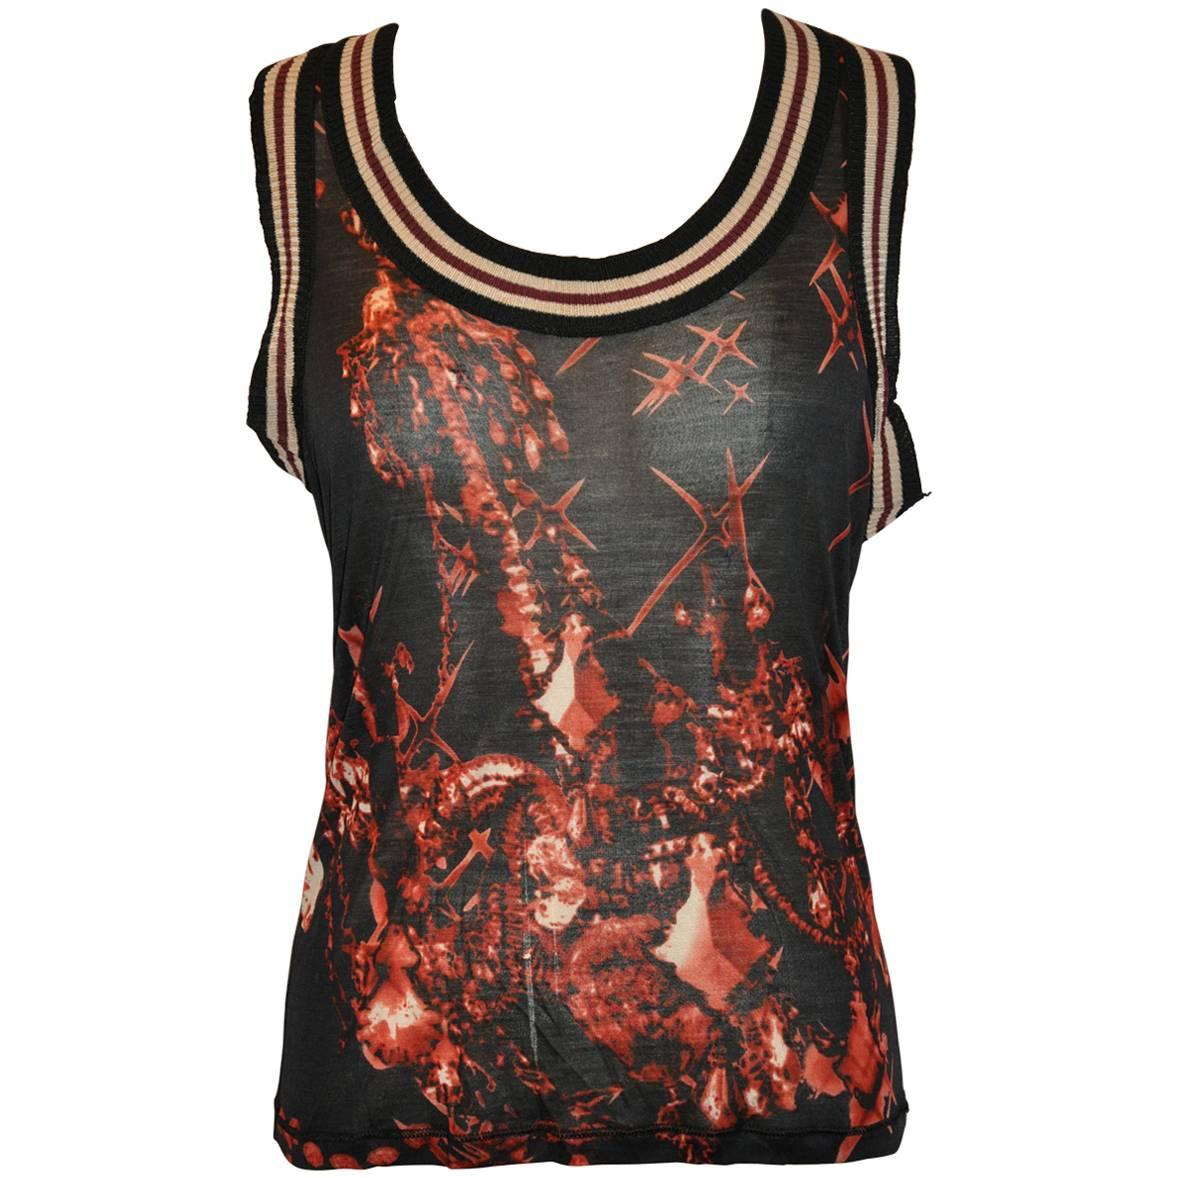 Jean Paul Gaultier Stretch Racer's Back with Stripe Accent Tank Top For Sale